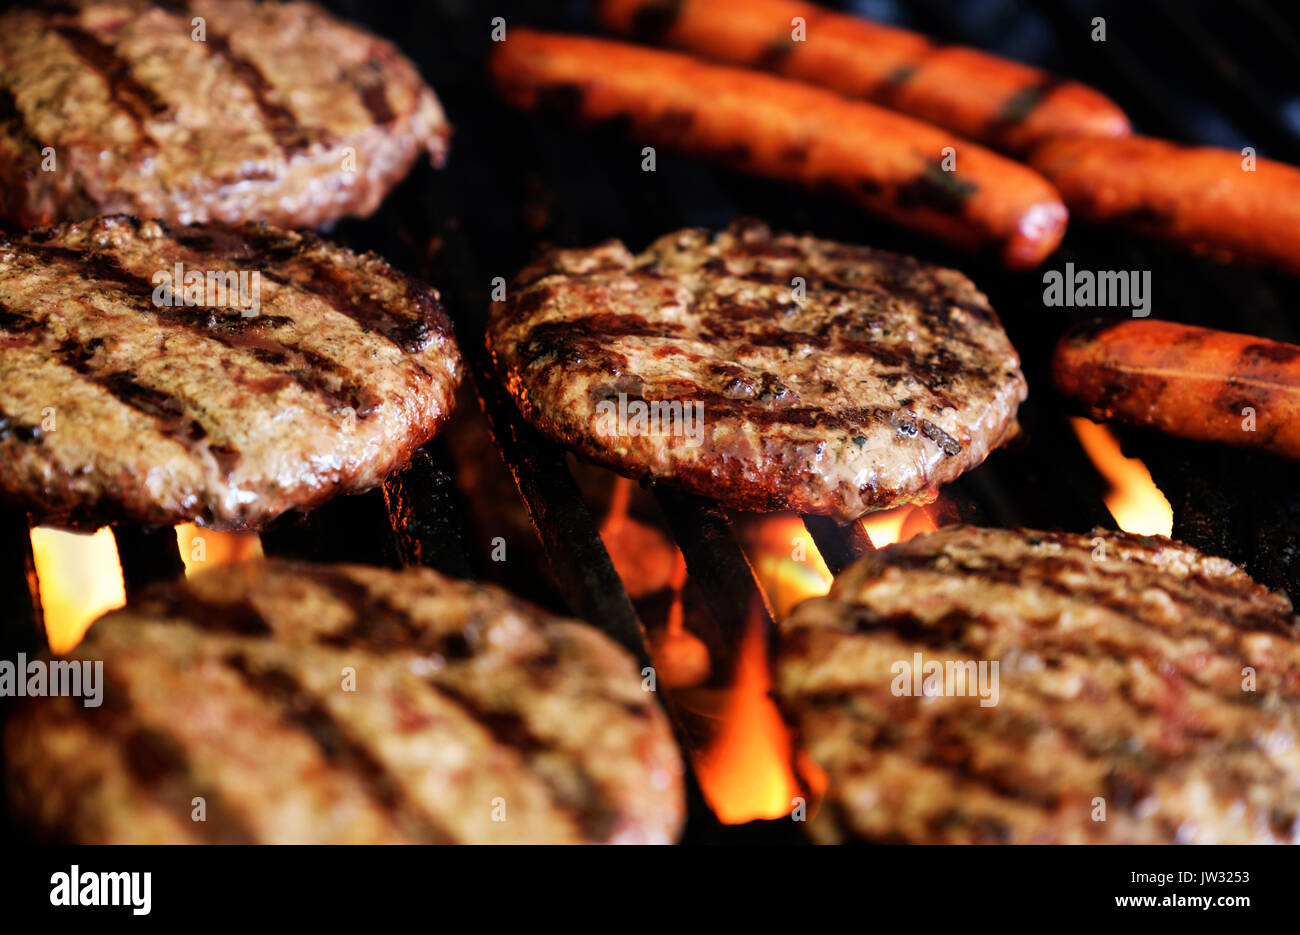 Hamburgers and hot dogs on barbeque grill Stock Photo